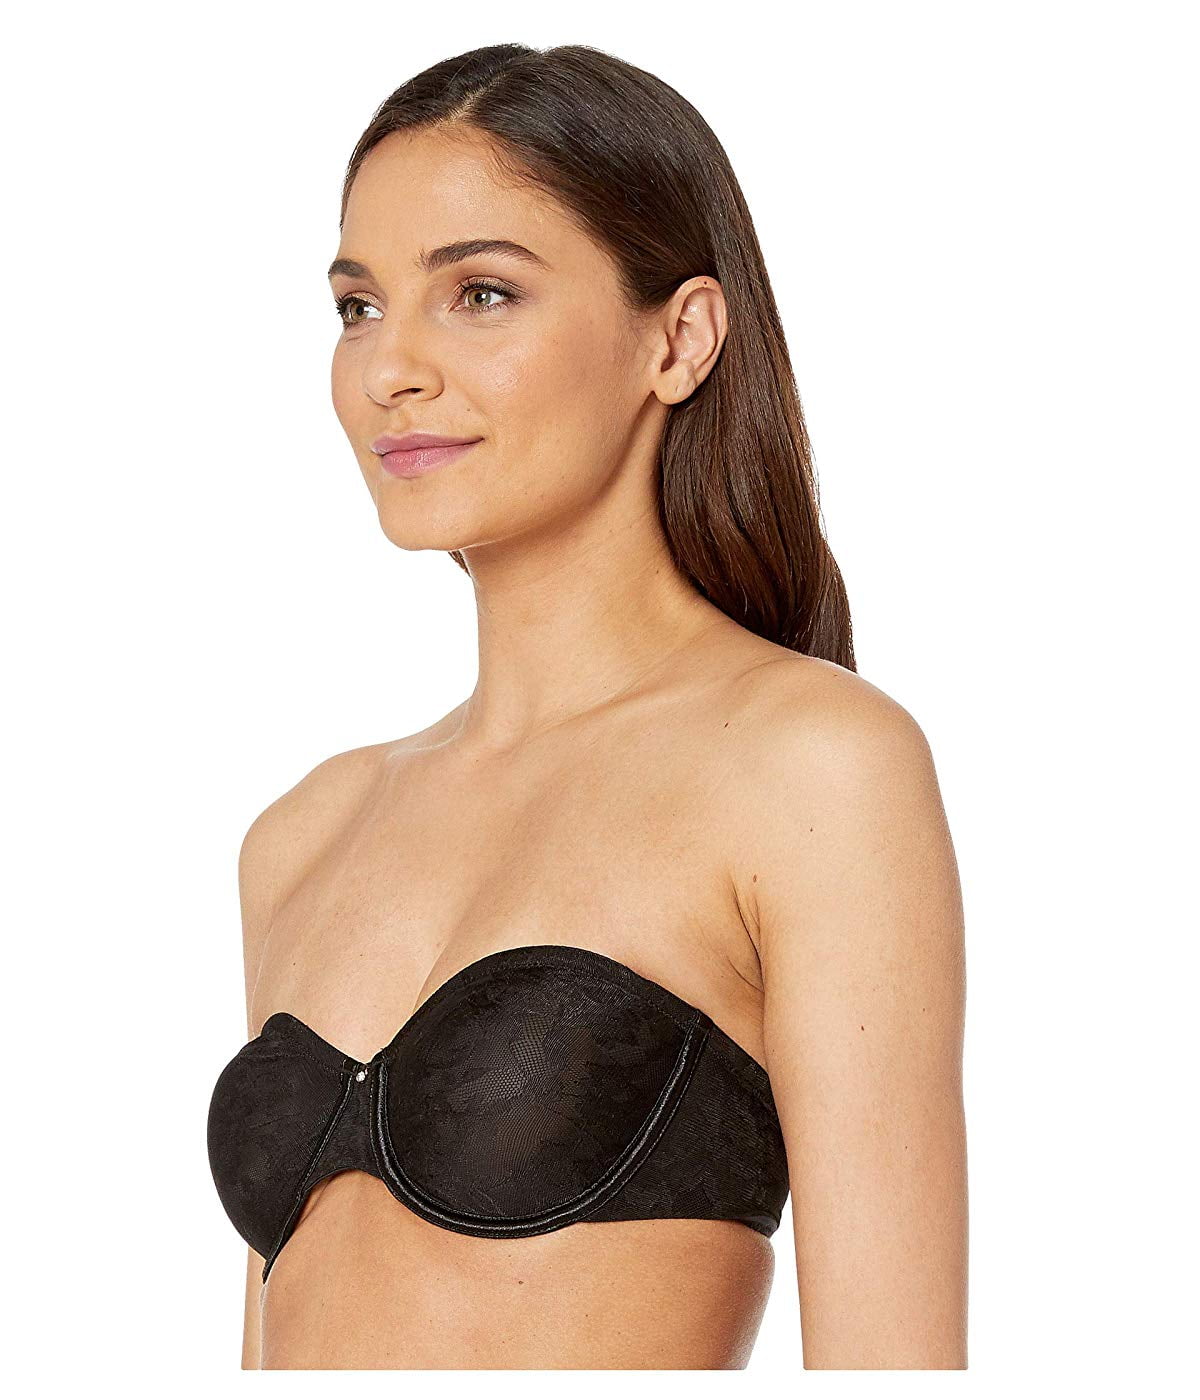 Details about   Le Mystere Lace Perfection Unlined Strapless Convertible Bra 36C Black NWT $65